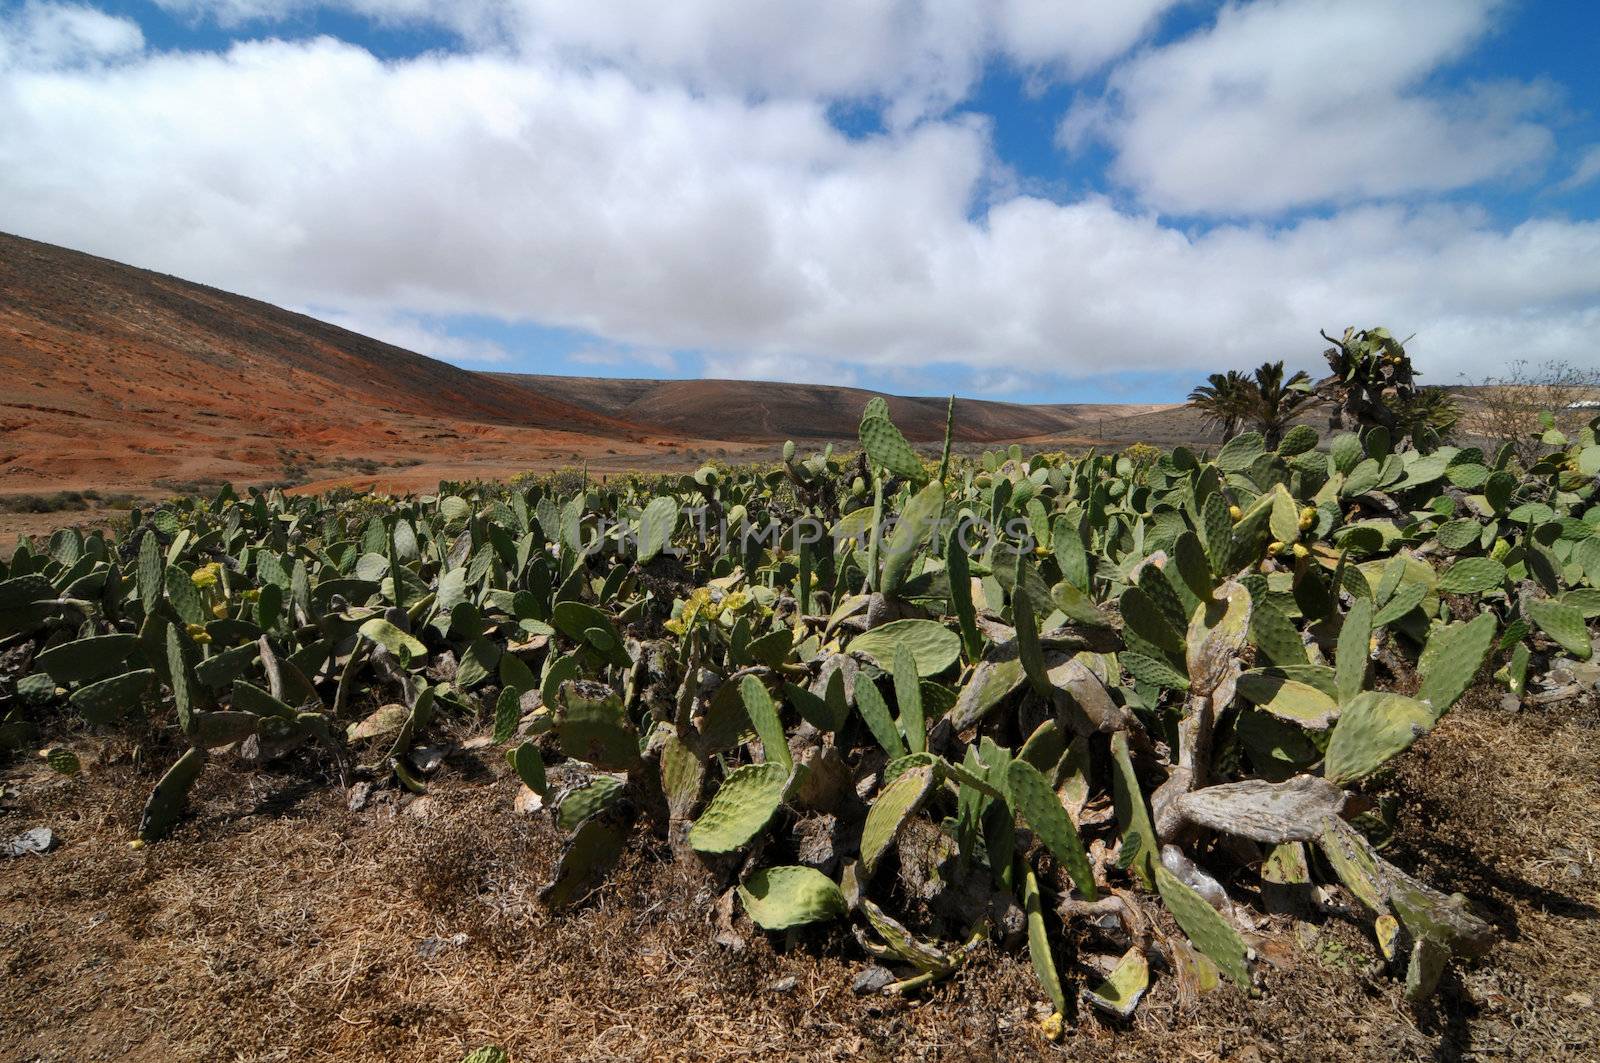 Cactus field on a cloudy sky, in Lanzarote, spain